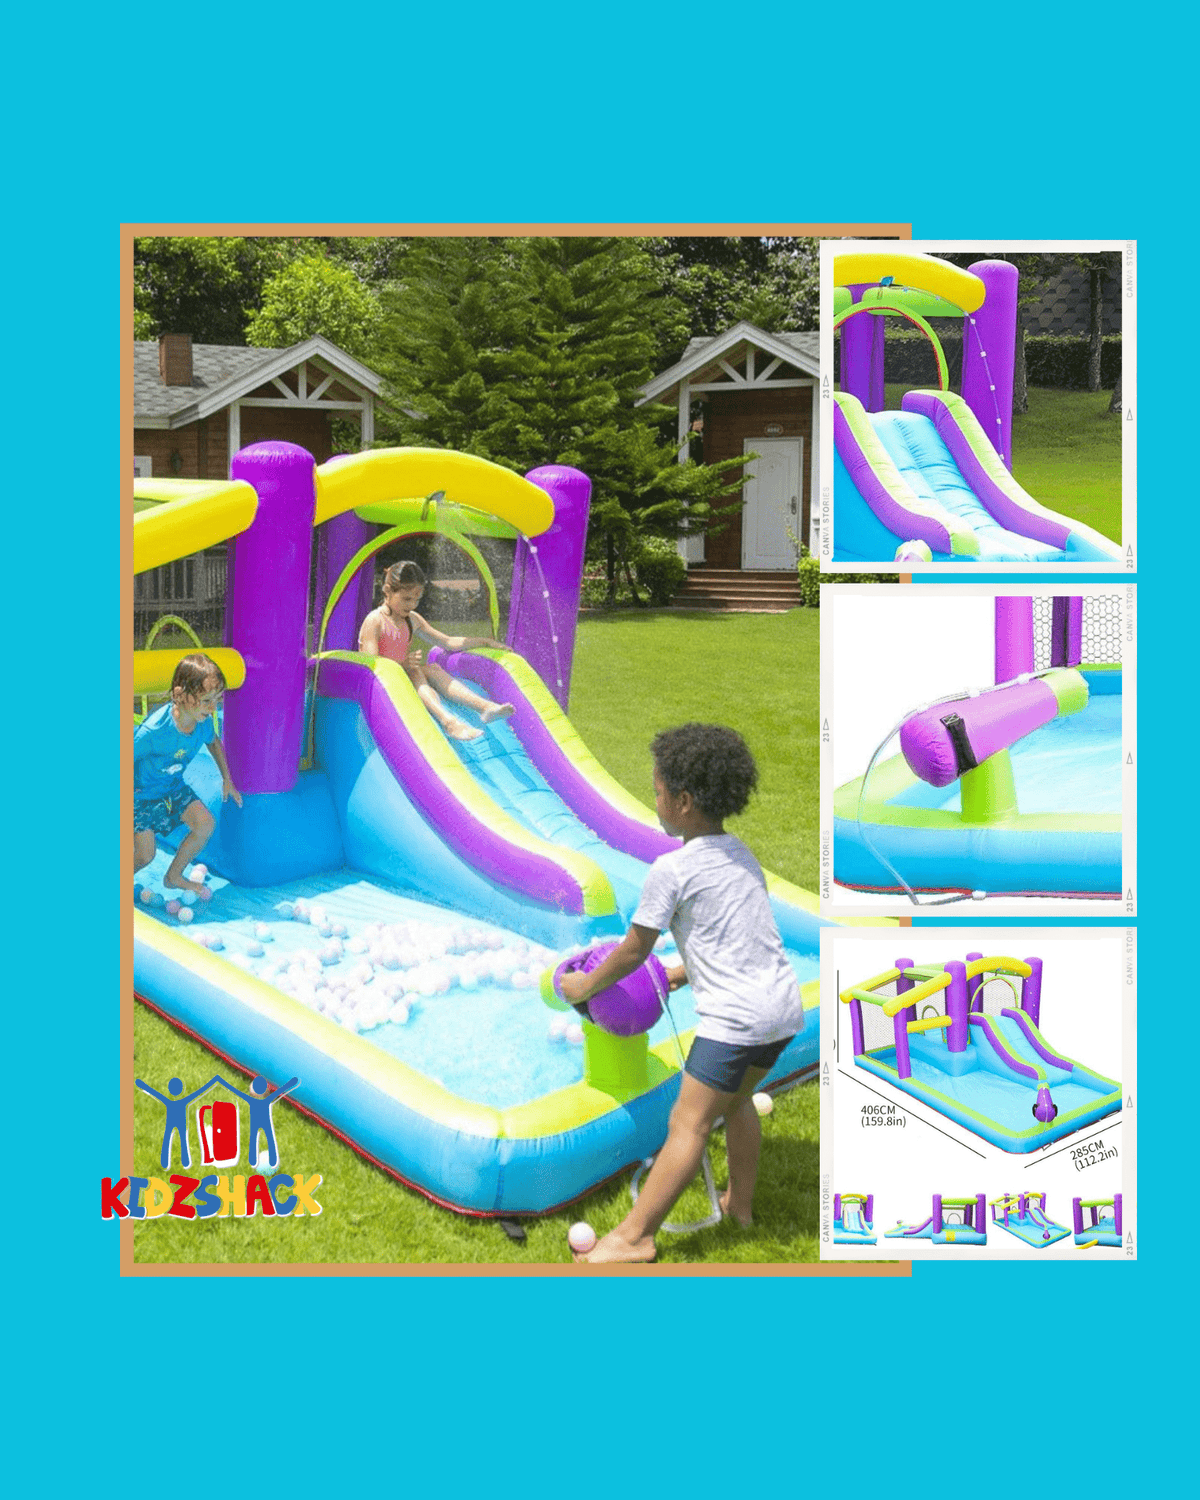 Water Park Junior Inflatable (73001)